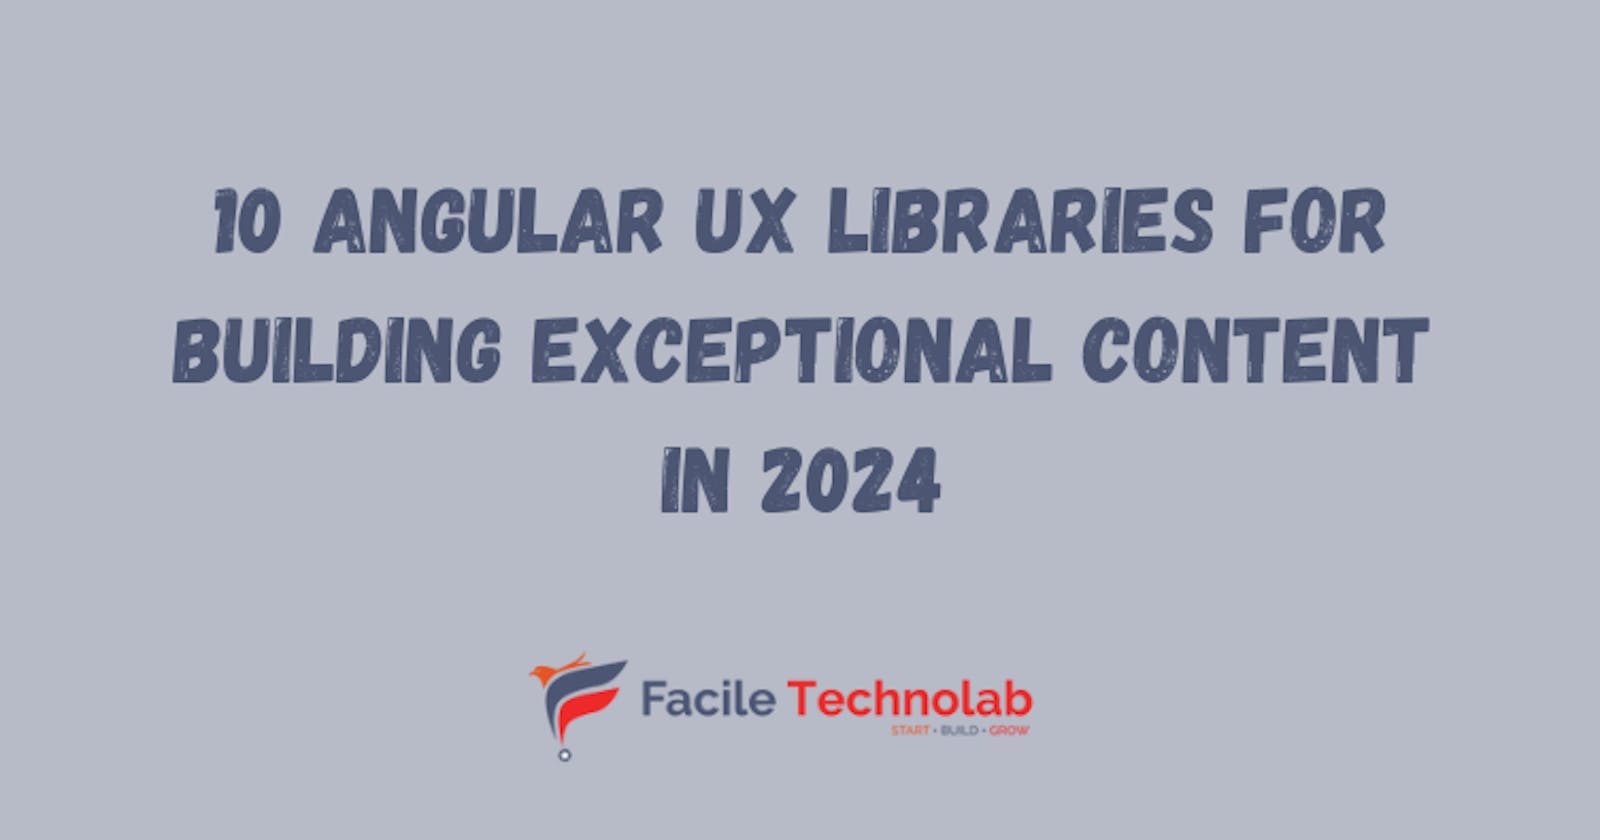 10 Angular UX Libraries for Building Exceptional User Experience in 2024